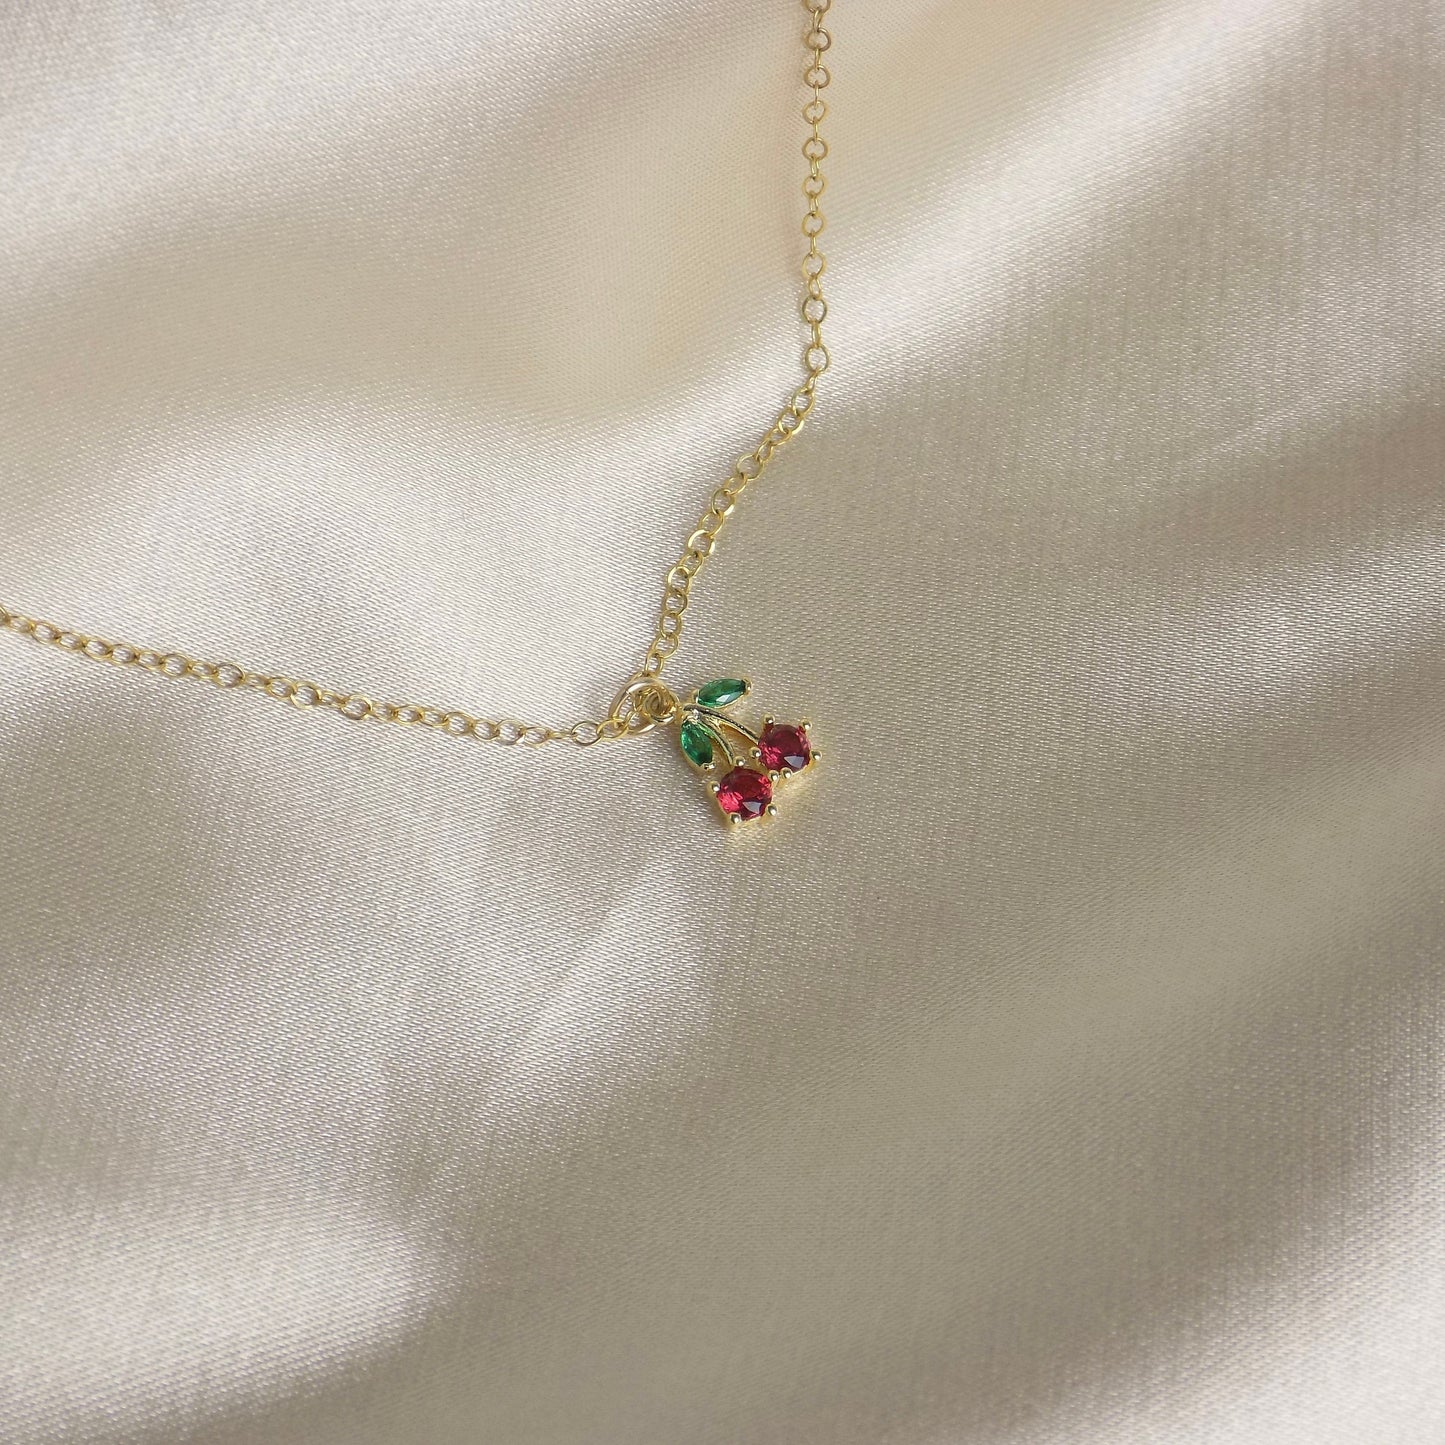 Tiny Cherry Necklace Gold, Small Zircon Red Cherry Charm Necklace, Dainty Gold Layer, 14K Gold Filled Chain, Gifts For Her, M6-32